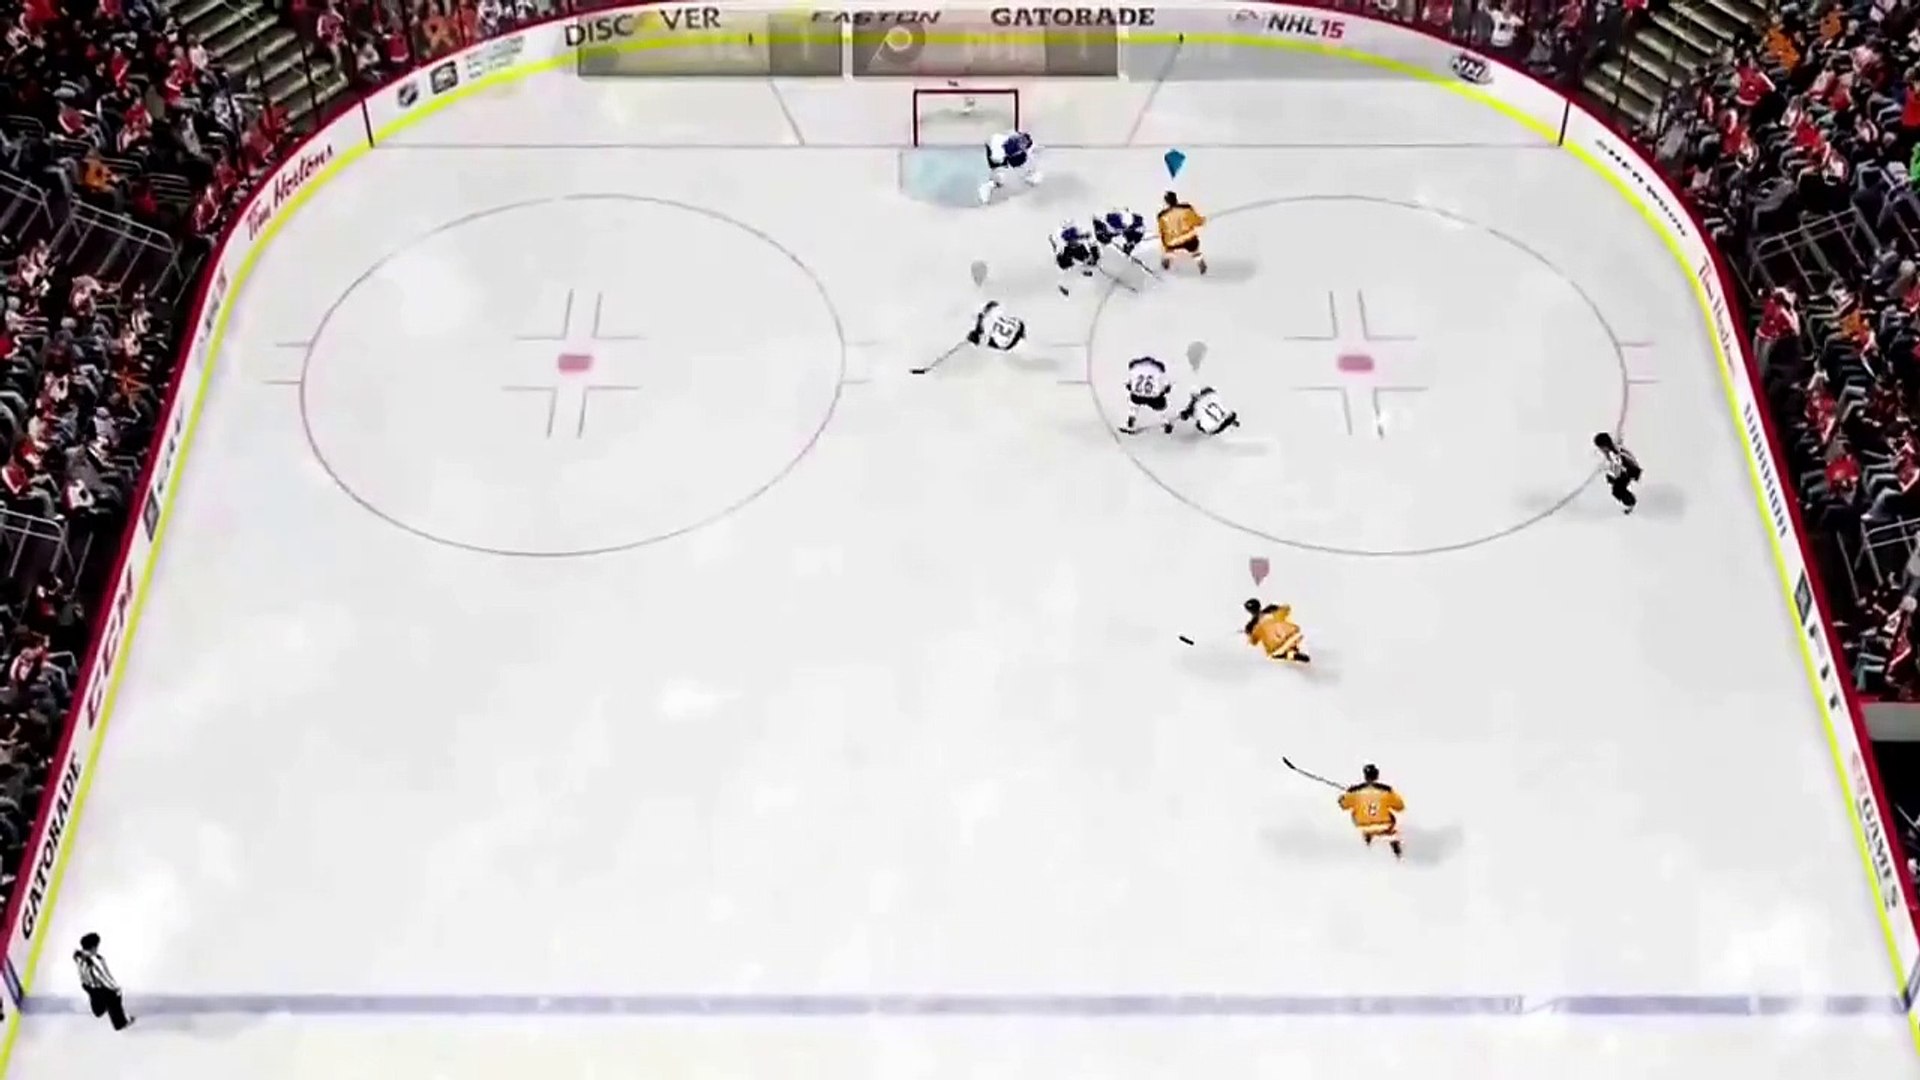 NHL 15 OTP beautie saucer pass leads to 